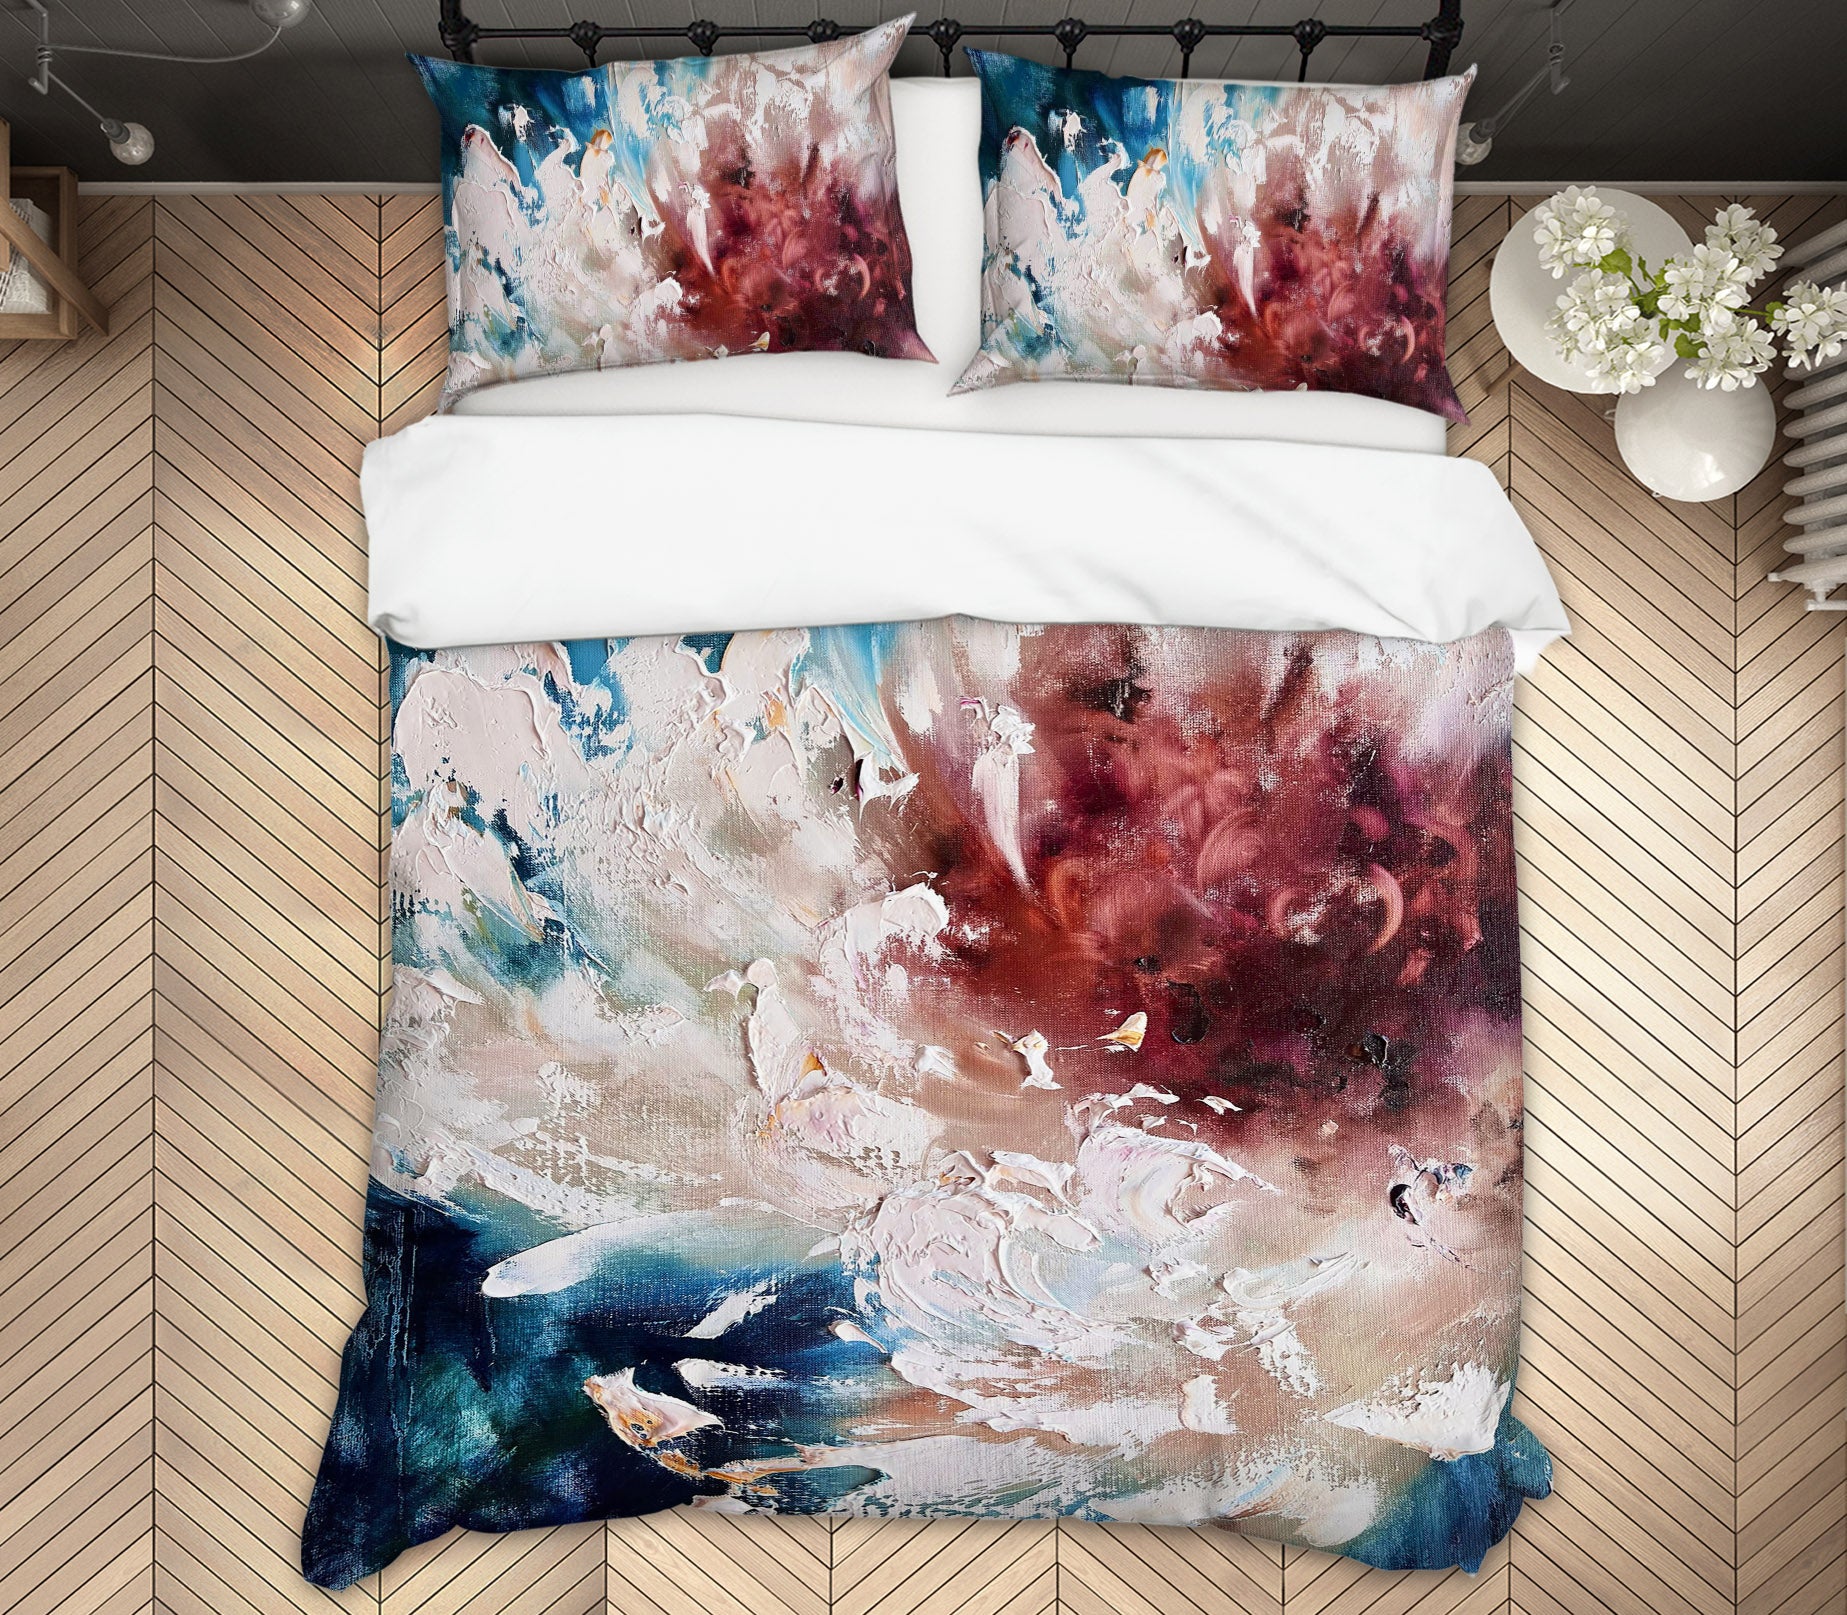 3D Painted Flowers 533 Skromova Marina Bedding Bed Pillowcases Quilt